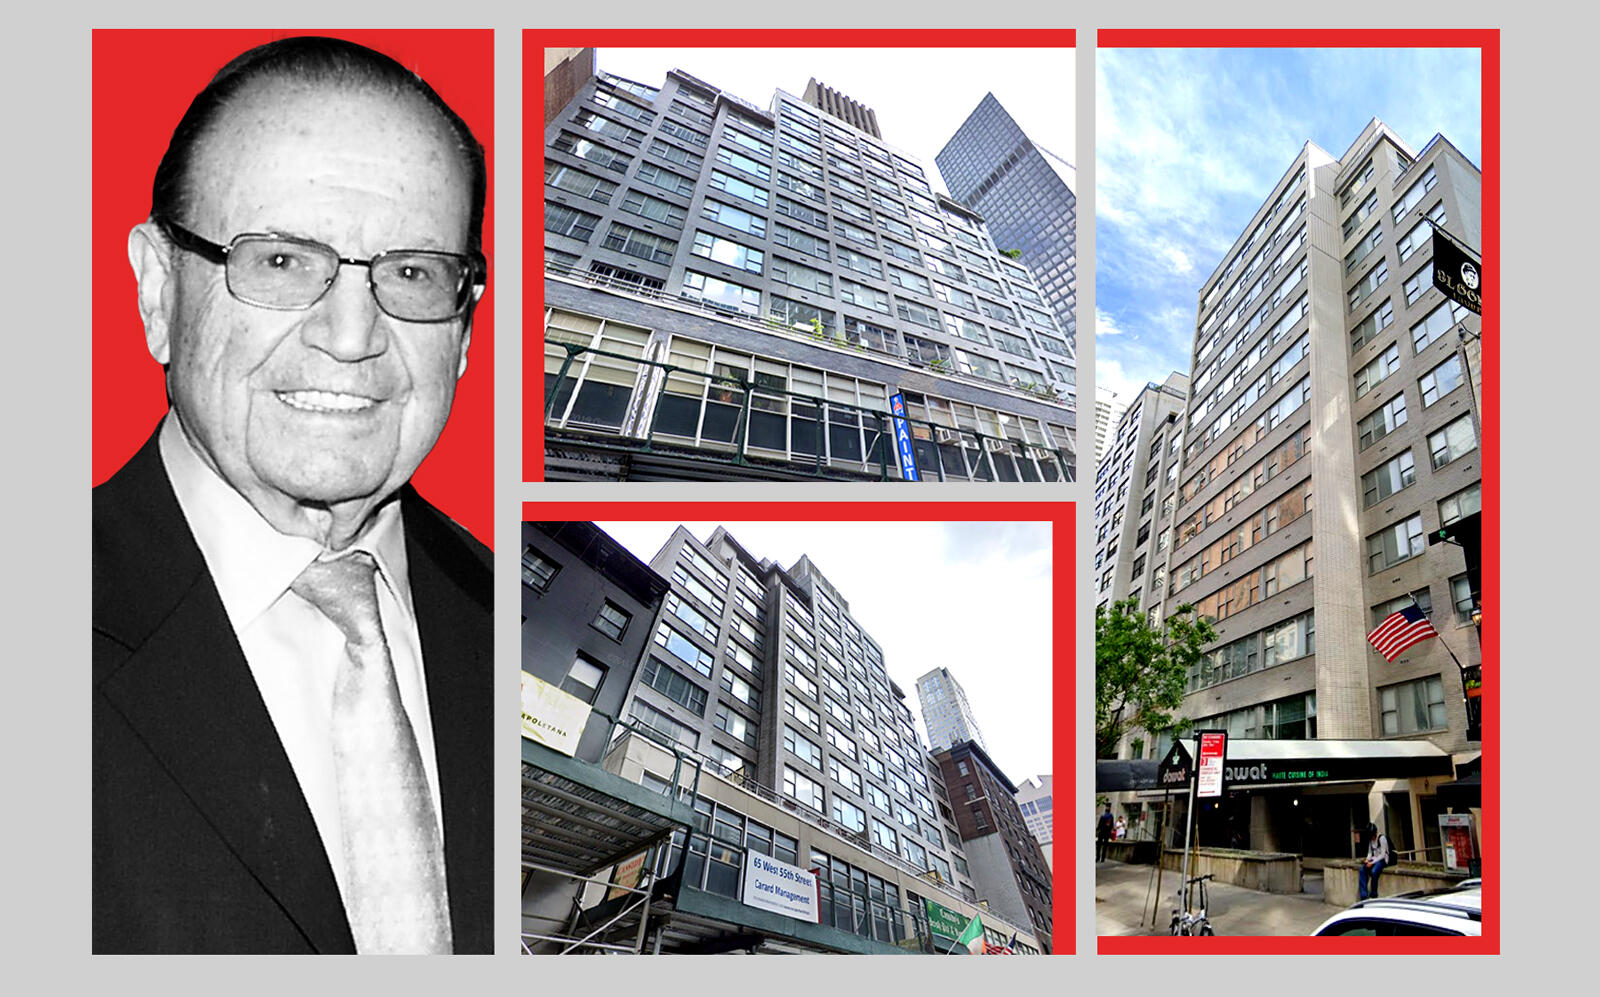 From left: Alvin Dworman, 155 East 55th Street, 65 West 55th Street, and 210 East 58th Street (Getty, Google Maps)